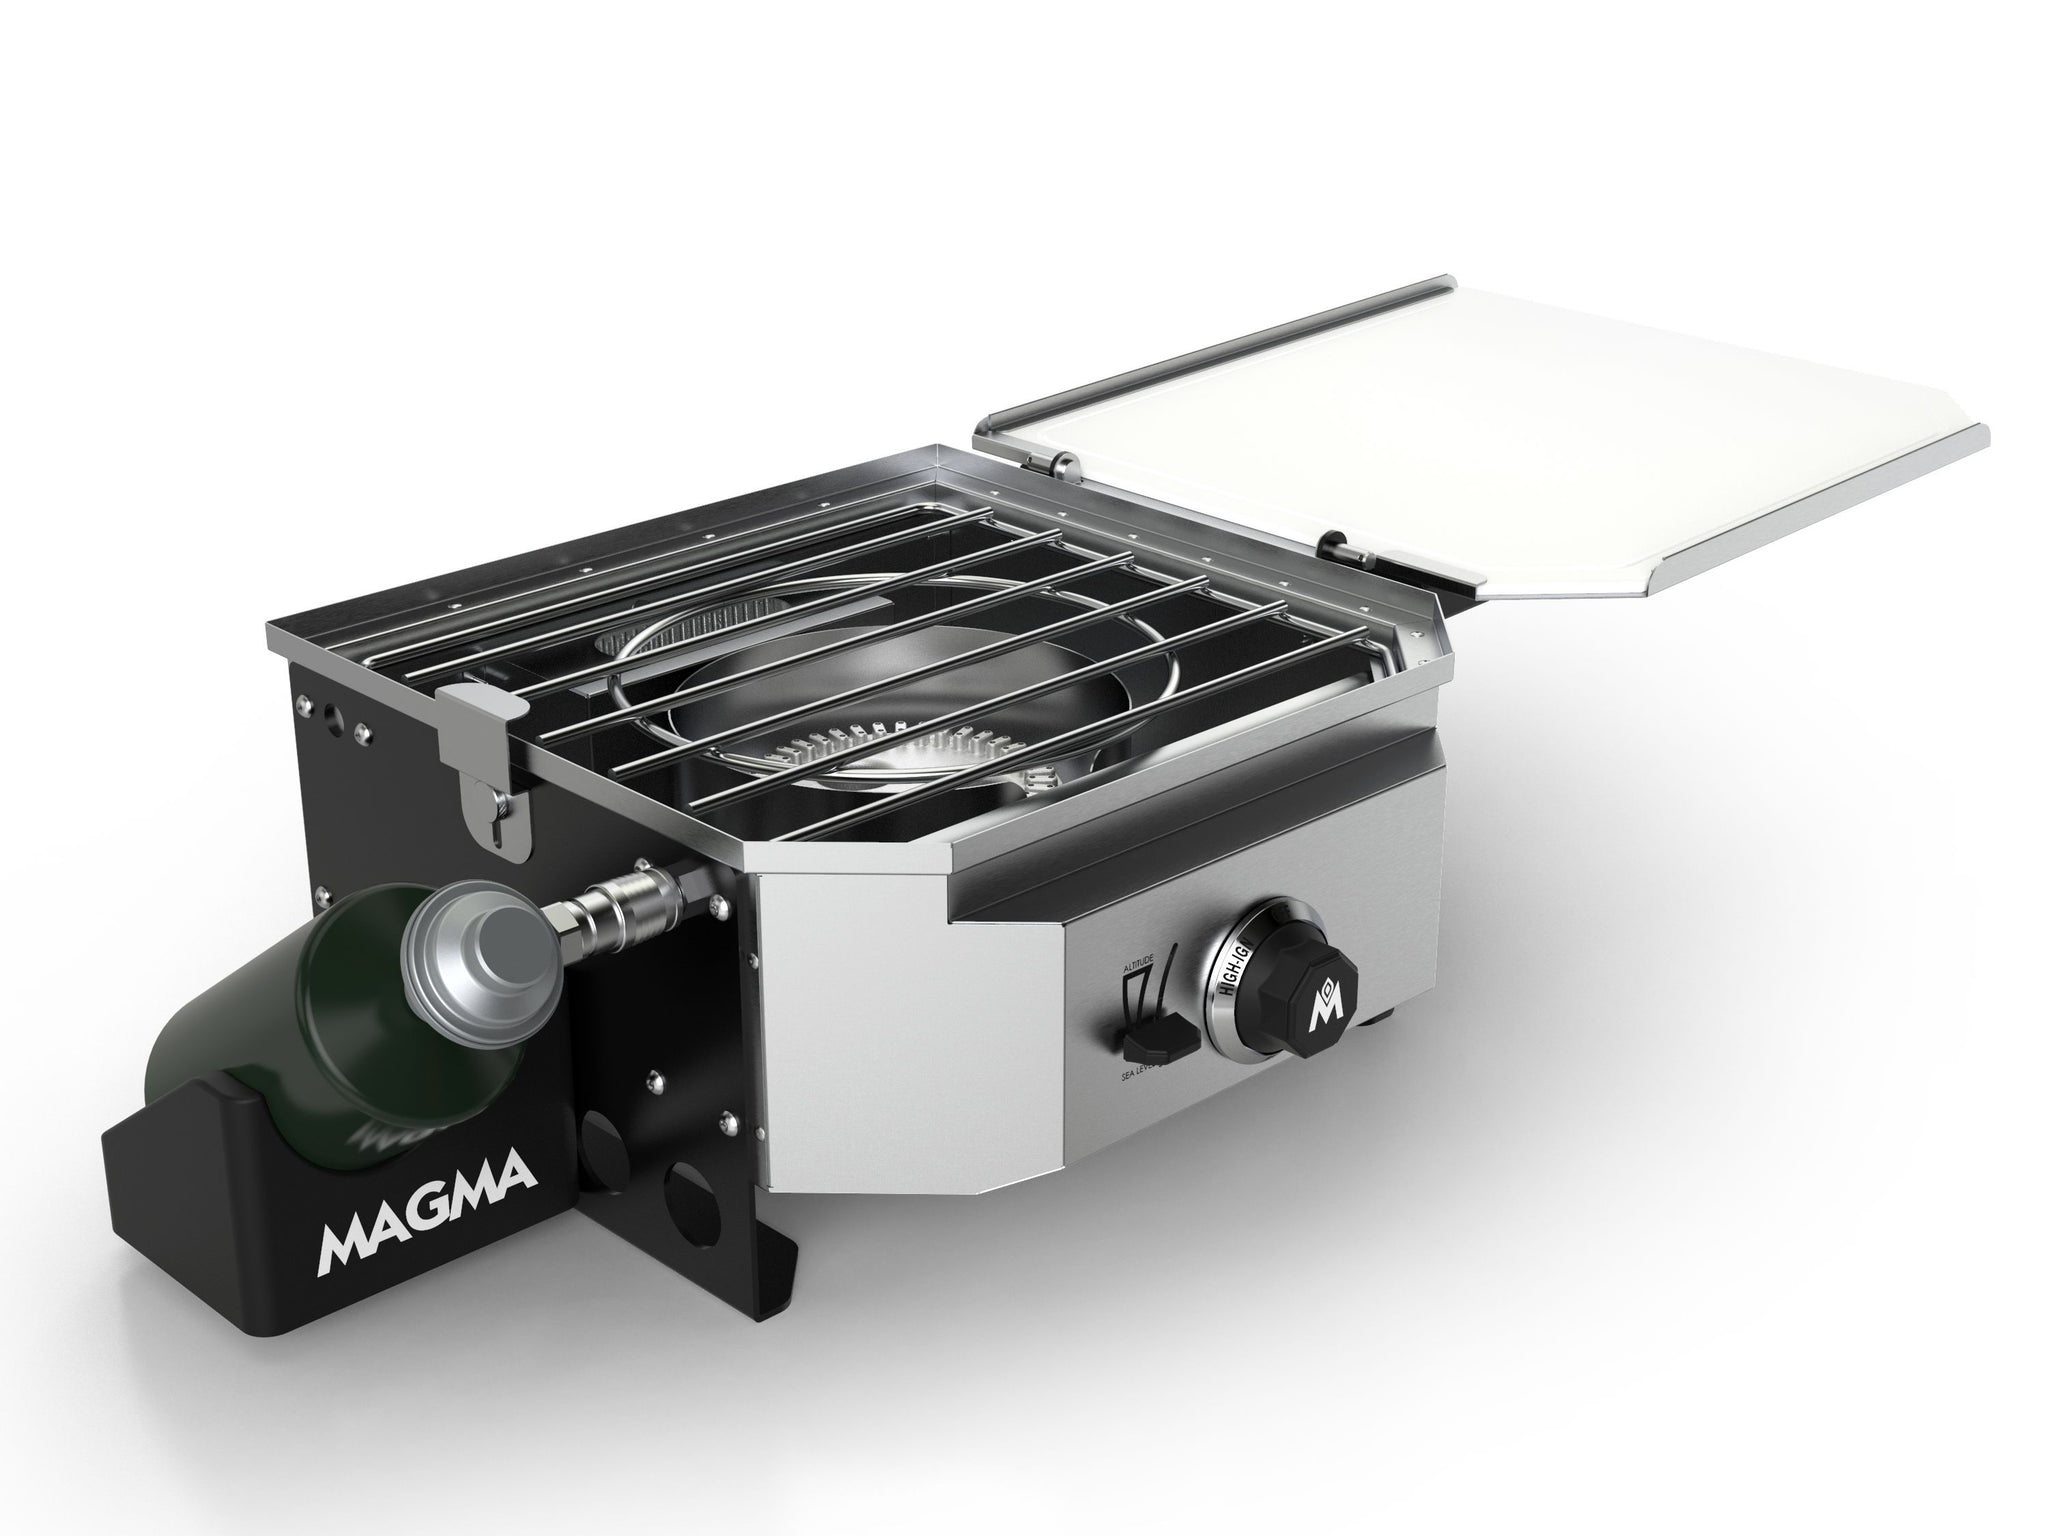 Magma CO10-115, RV Crossover Bundle, Double Burner Firebox, Grill Top, Griddle Top, Plancha, and Pizza Oven Top